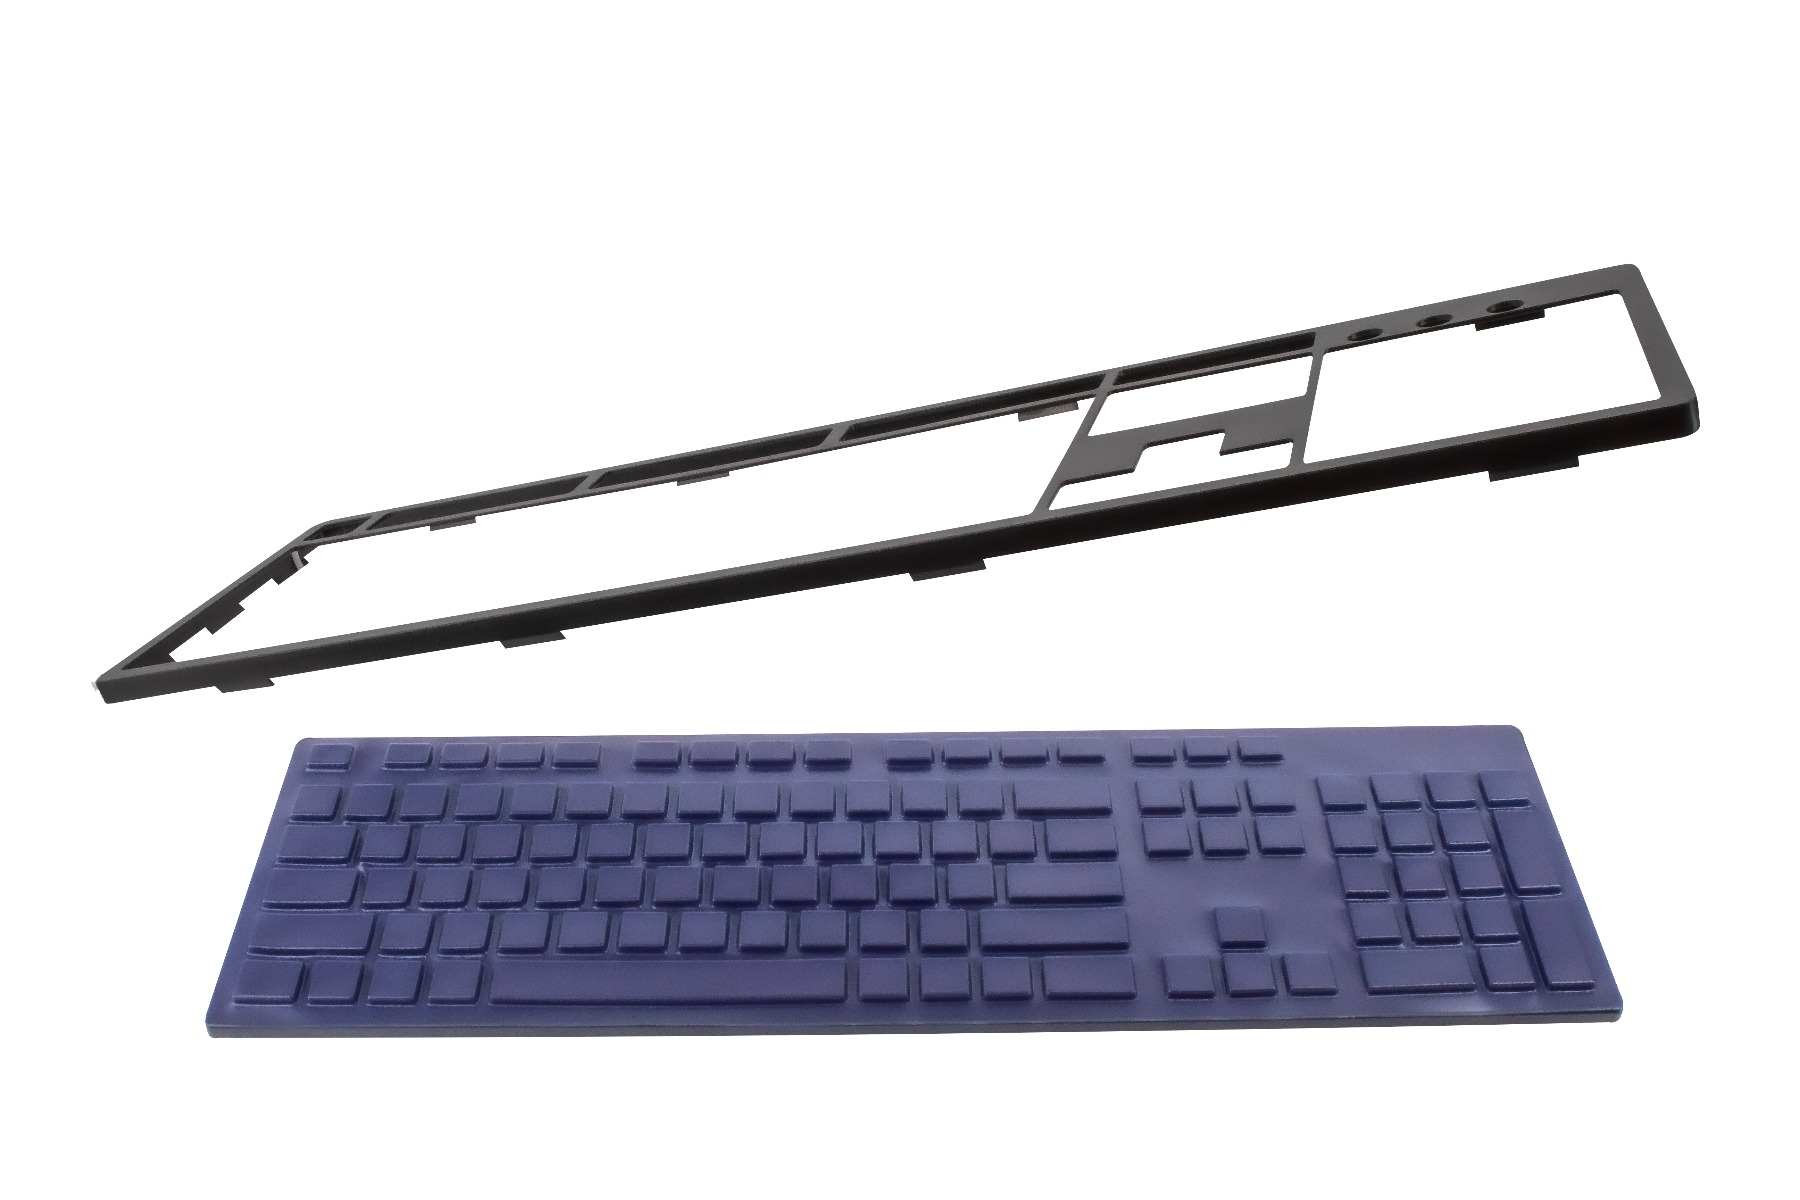 Dell EasySwap Frame and Cover KB216 Keyboard Typing Tutor